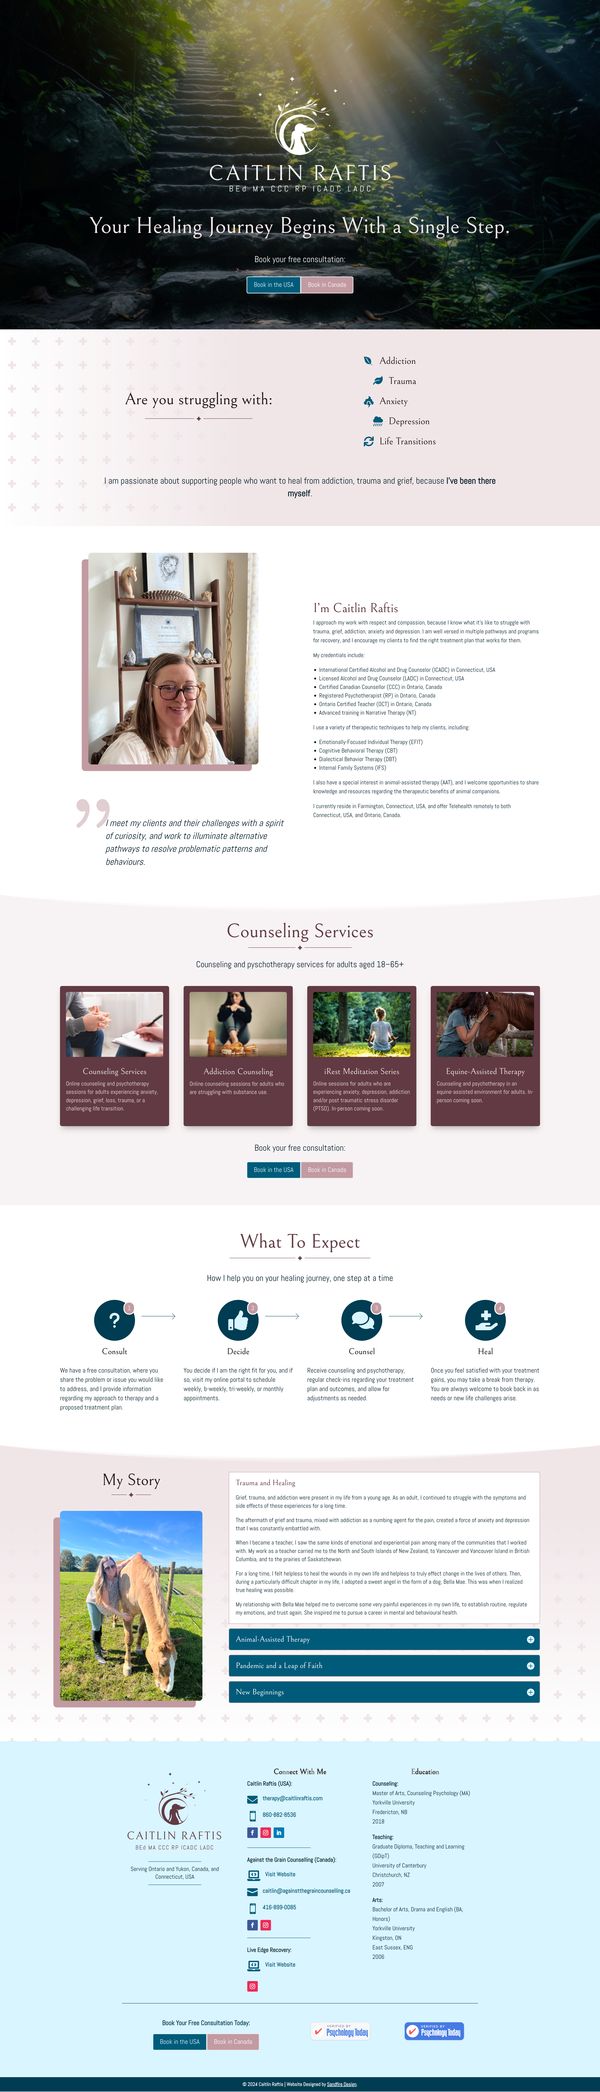 Home page of website for Caitlin Raftis Counseling Services.